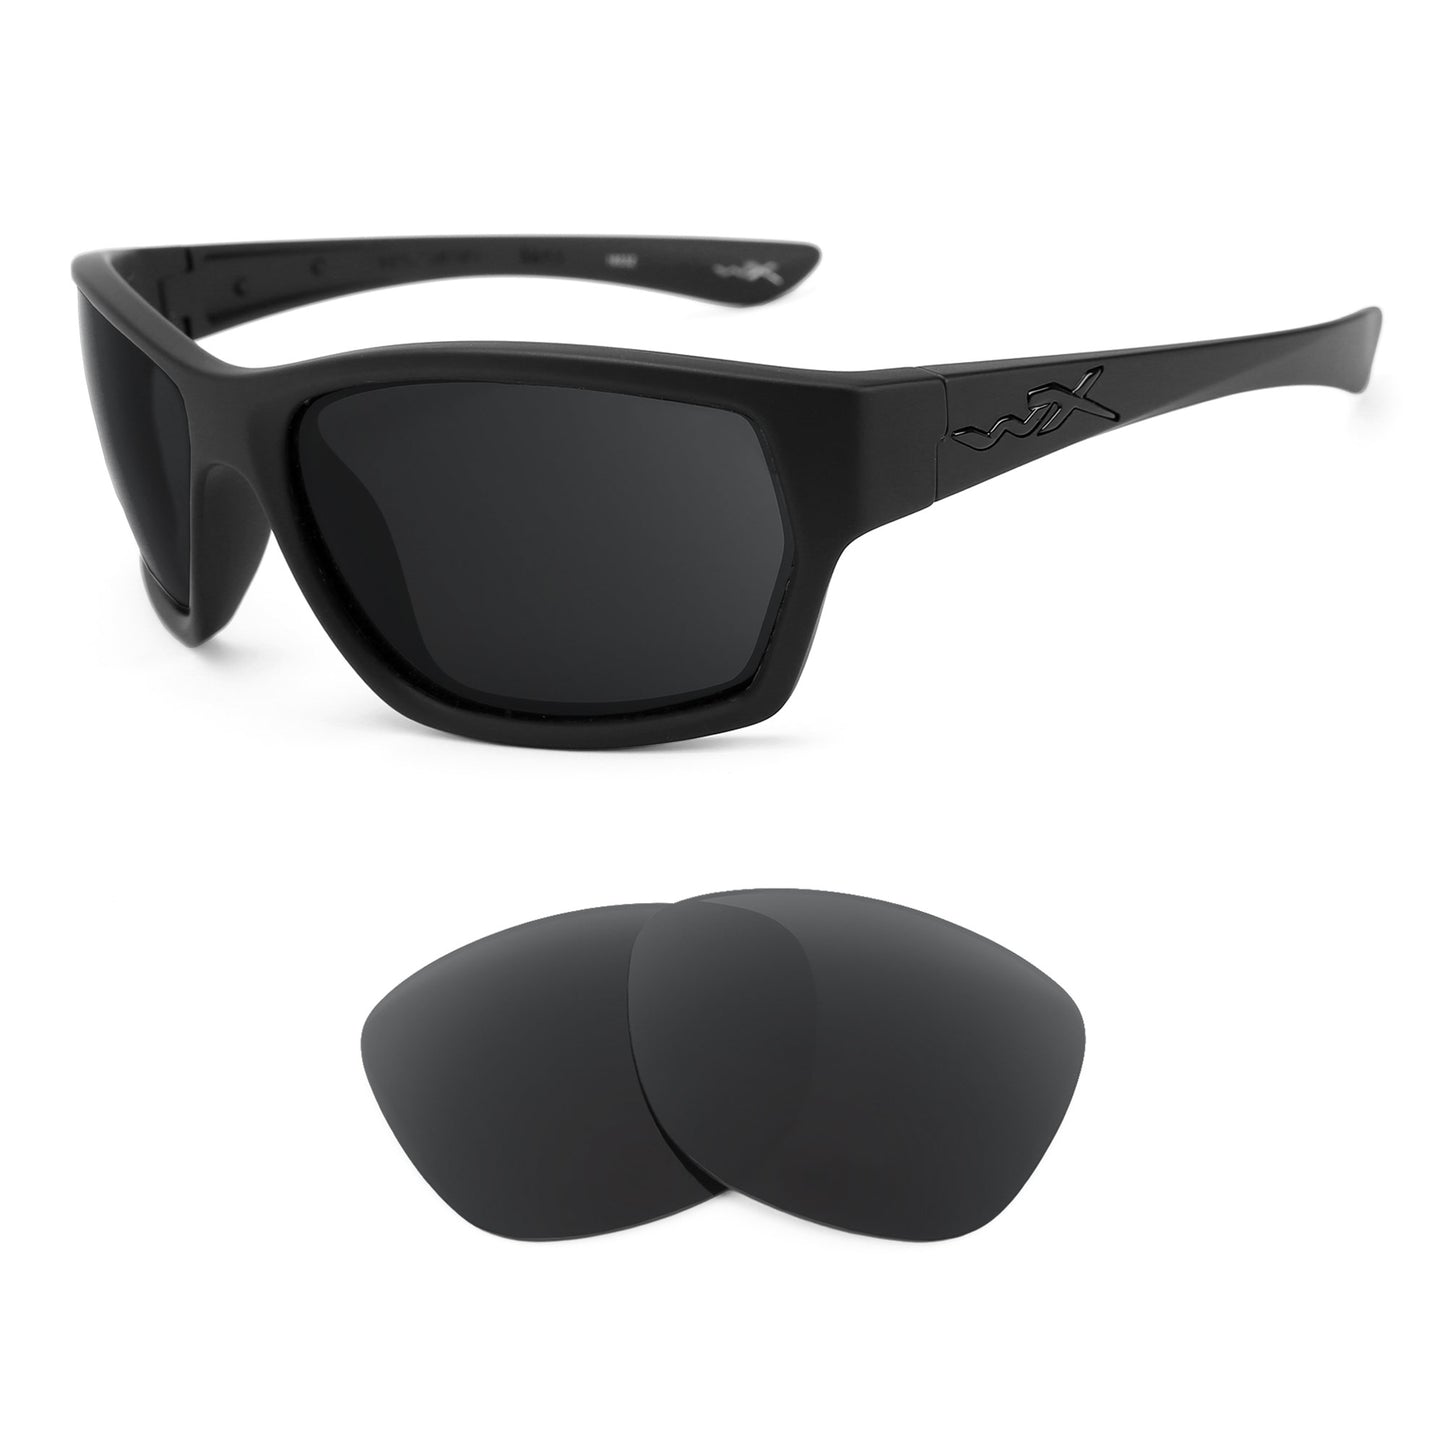 Wiley X Moxy sunglasses with replacement lenses